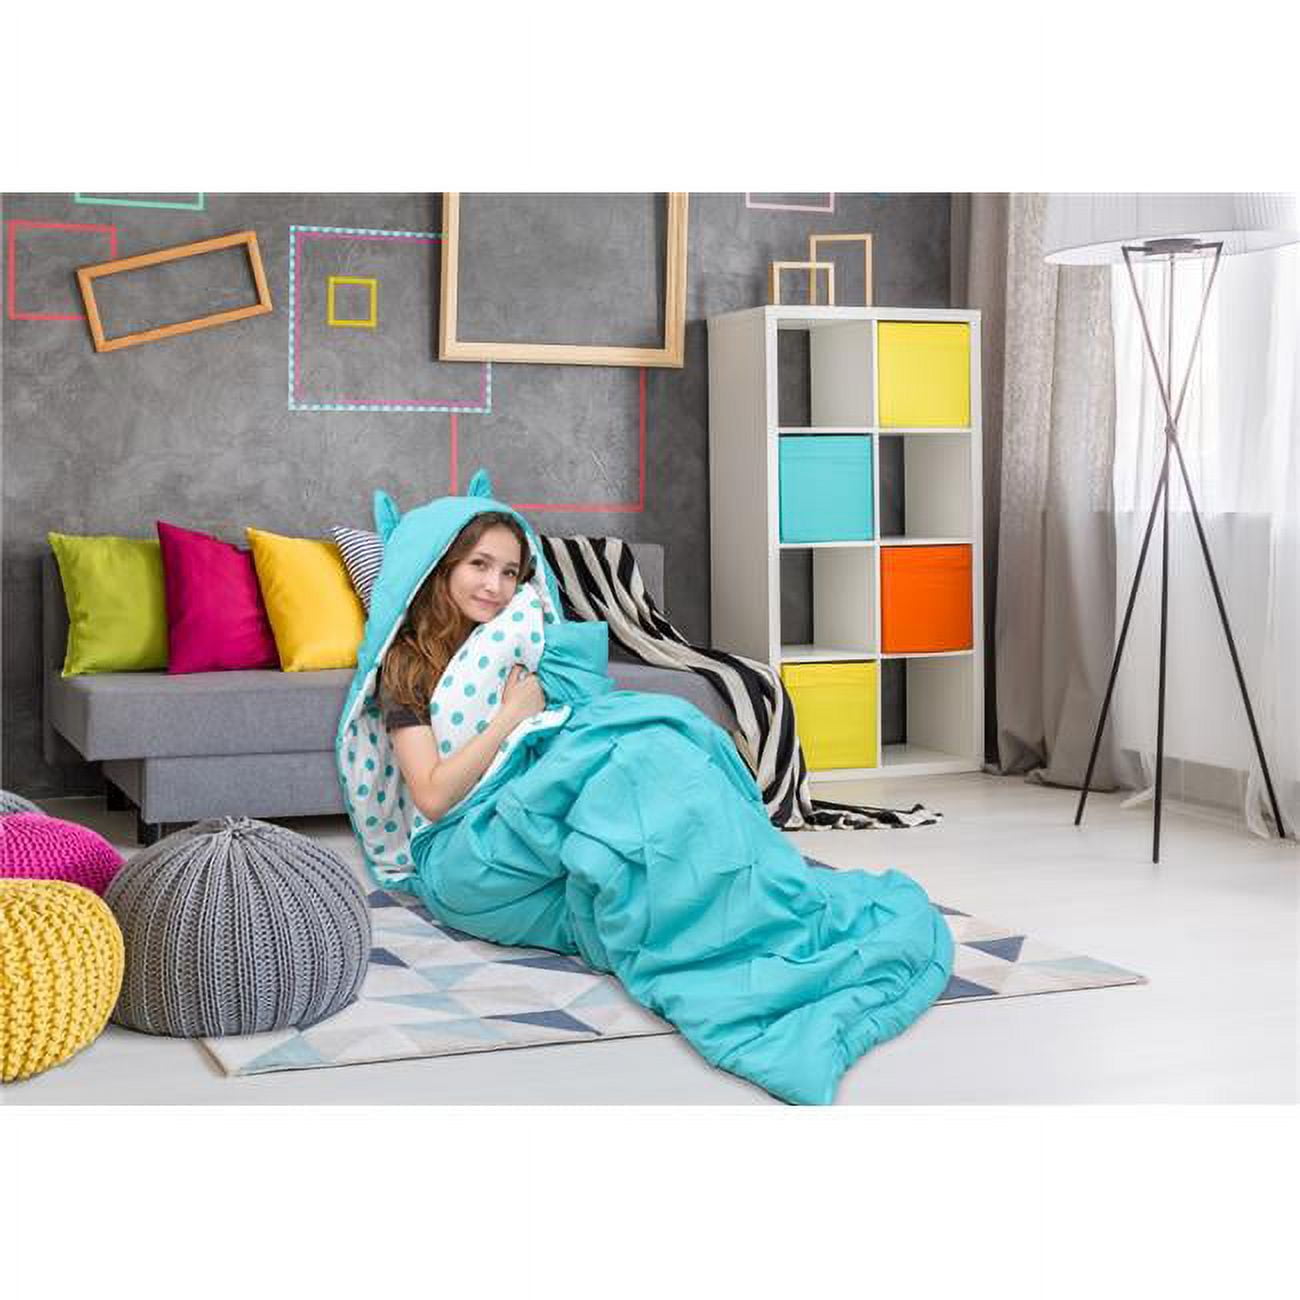 Picture of Chic Home BBG17925-US Jerry Sleeping Bag with Cat Ear Hood Pinch Pleat Design - Aqua Green & White